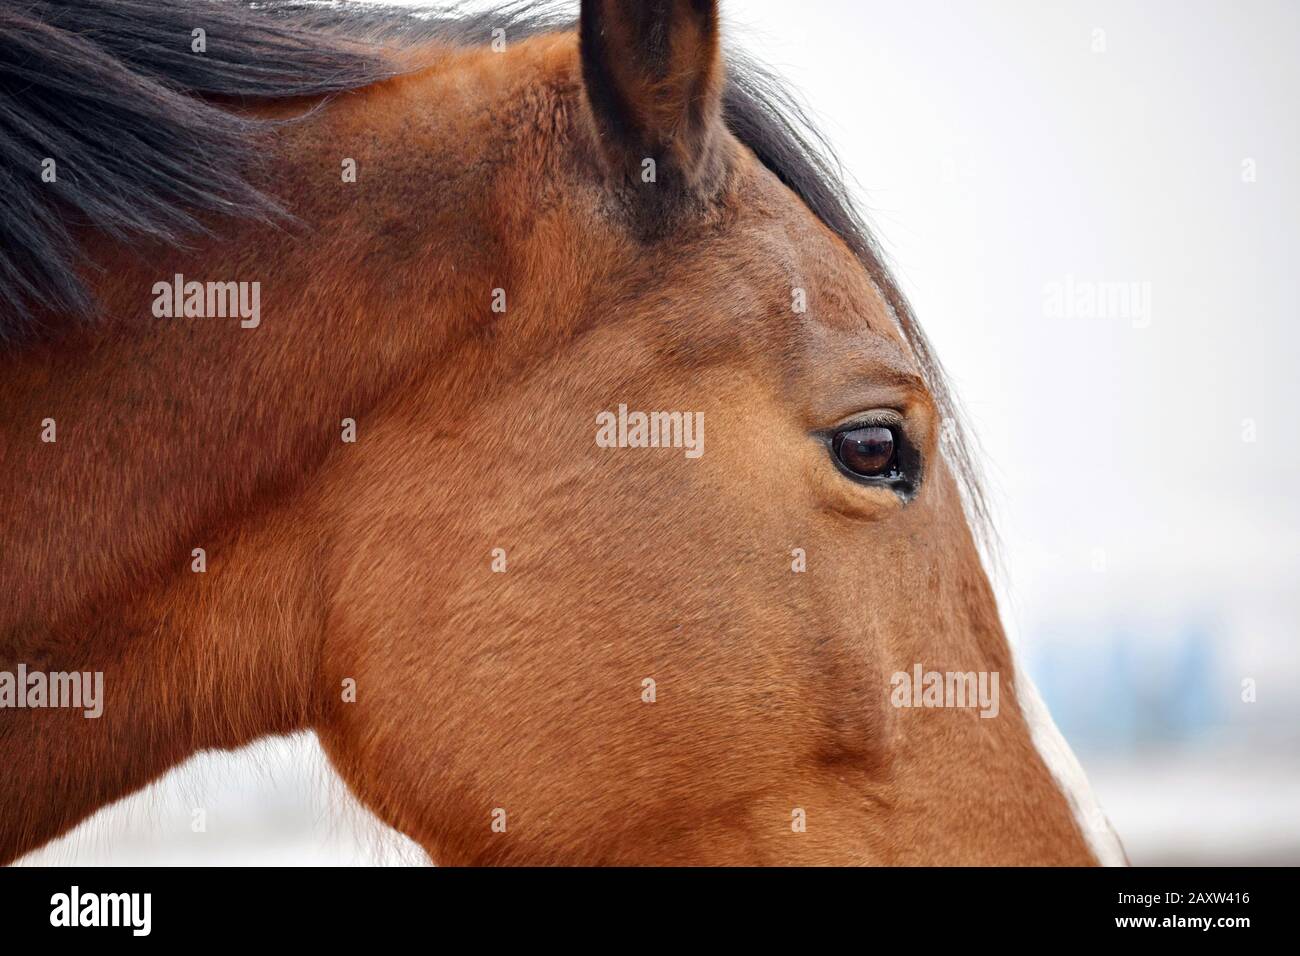 Brown Horse Head Beauty Close Up Foto Stock